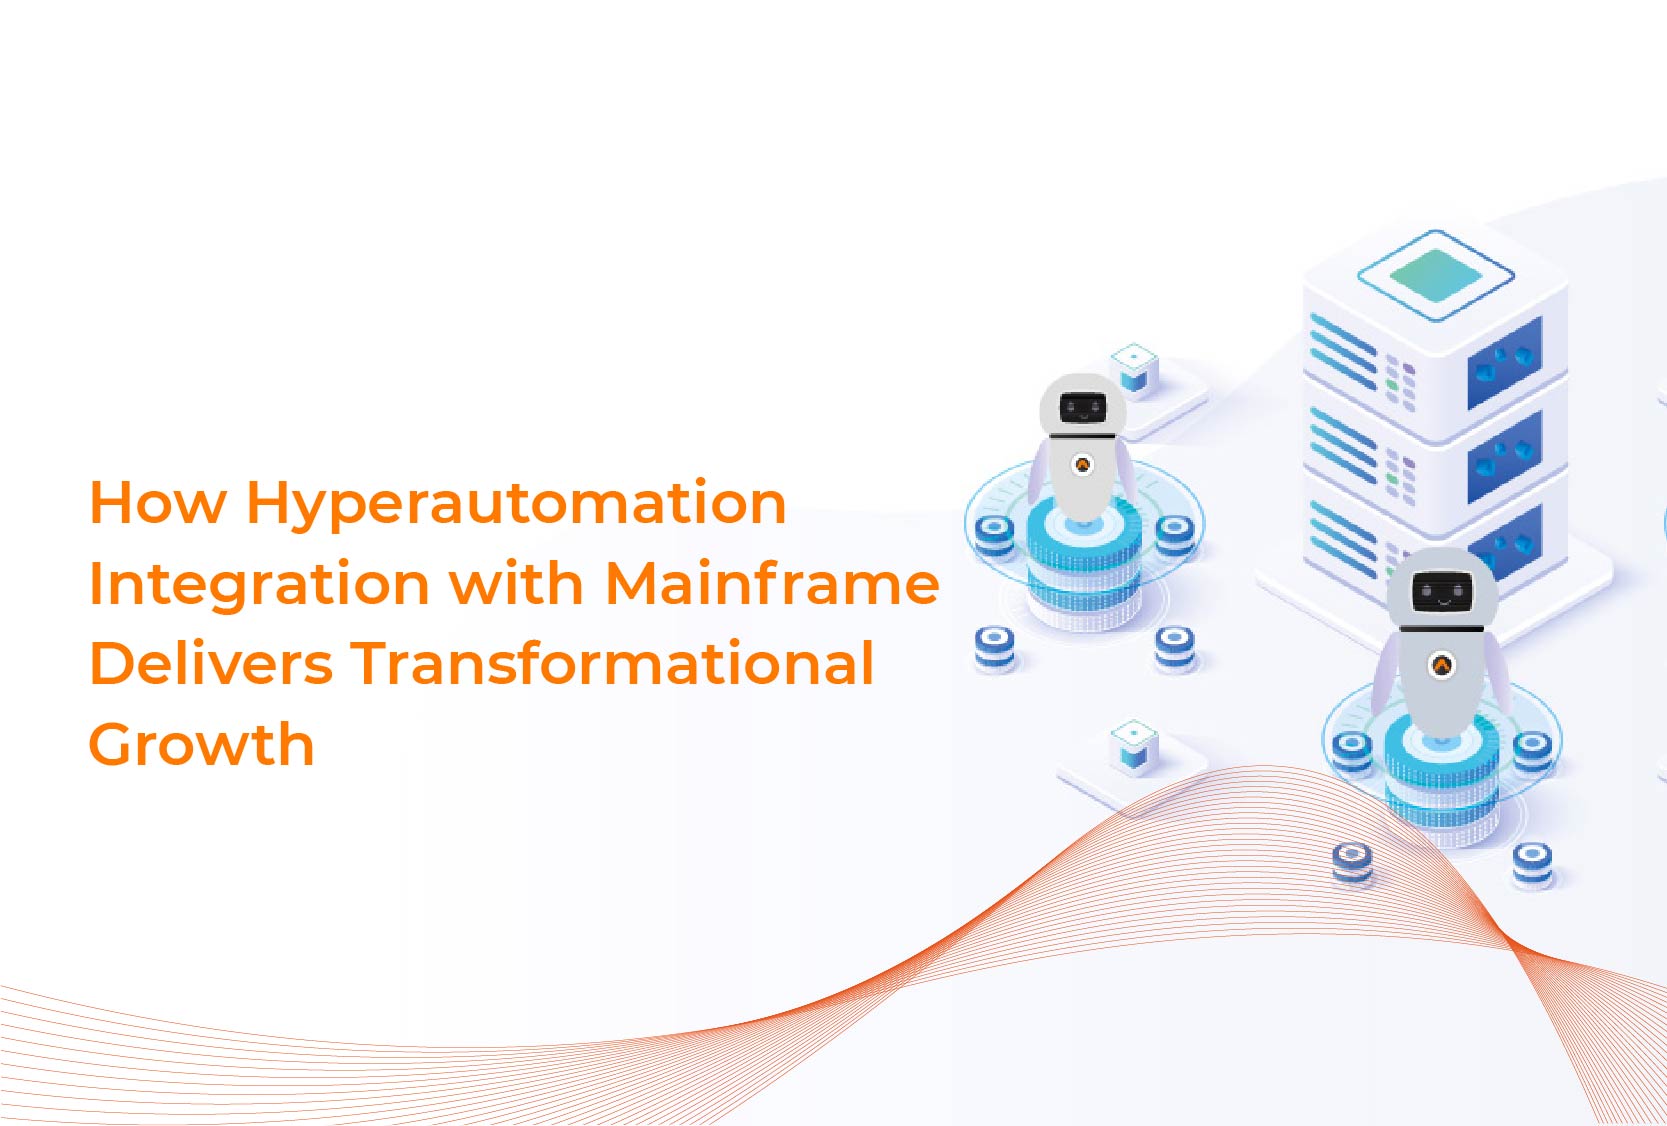 How Hyperautomation Integration with Mainframe Delivers Transformational Growth